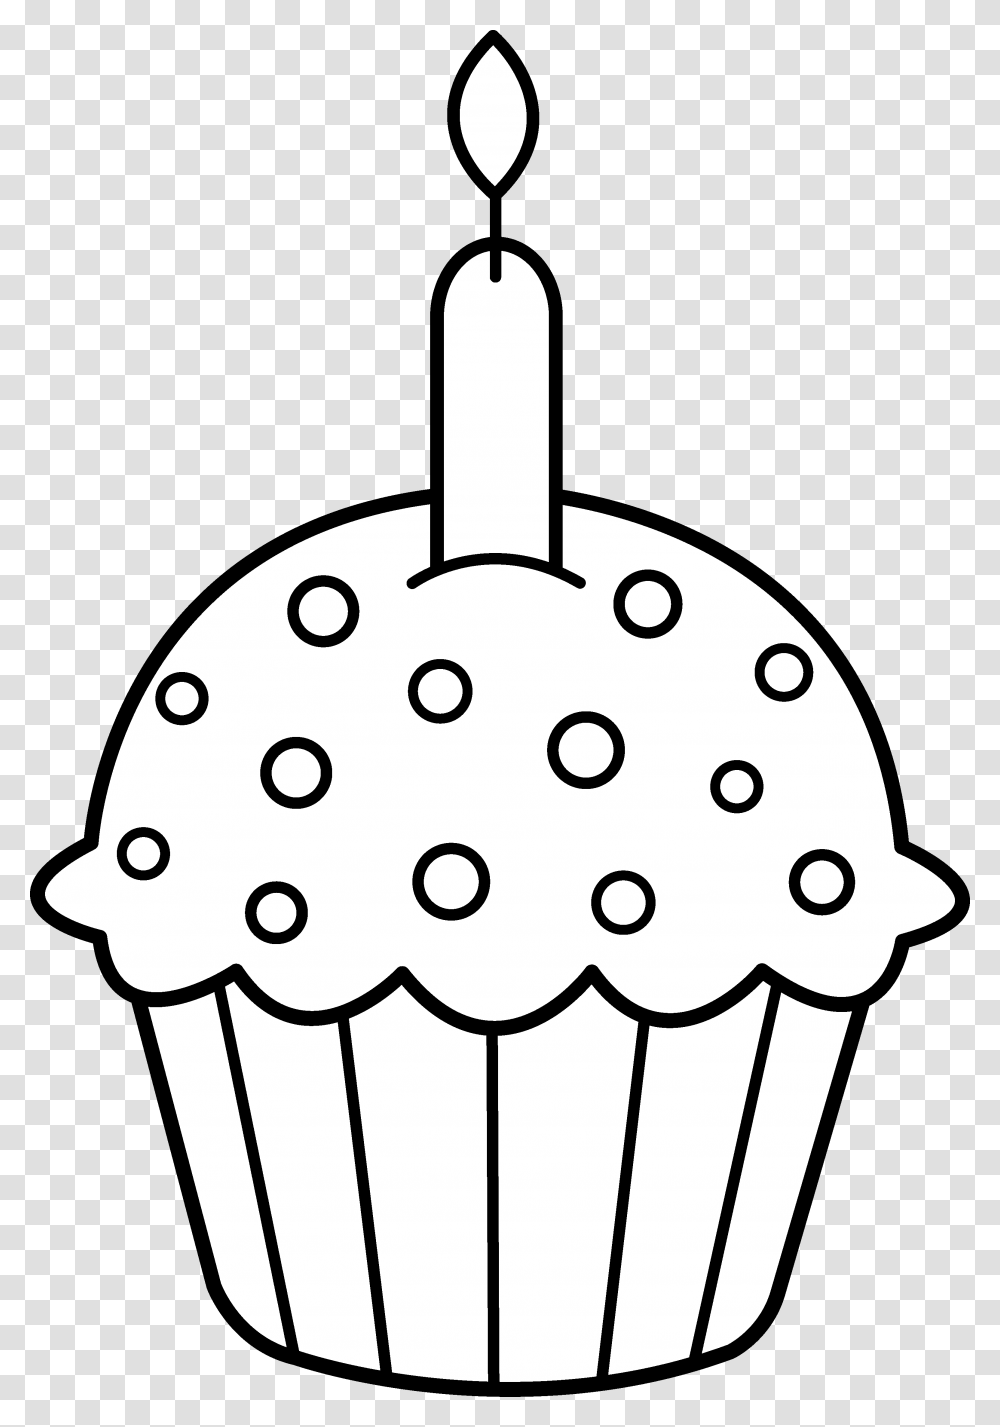 Icolor Cupcakes Roundtop Cupcake With Candle, Food, Dessert, Cream, Creme Transparent Png